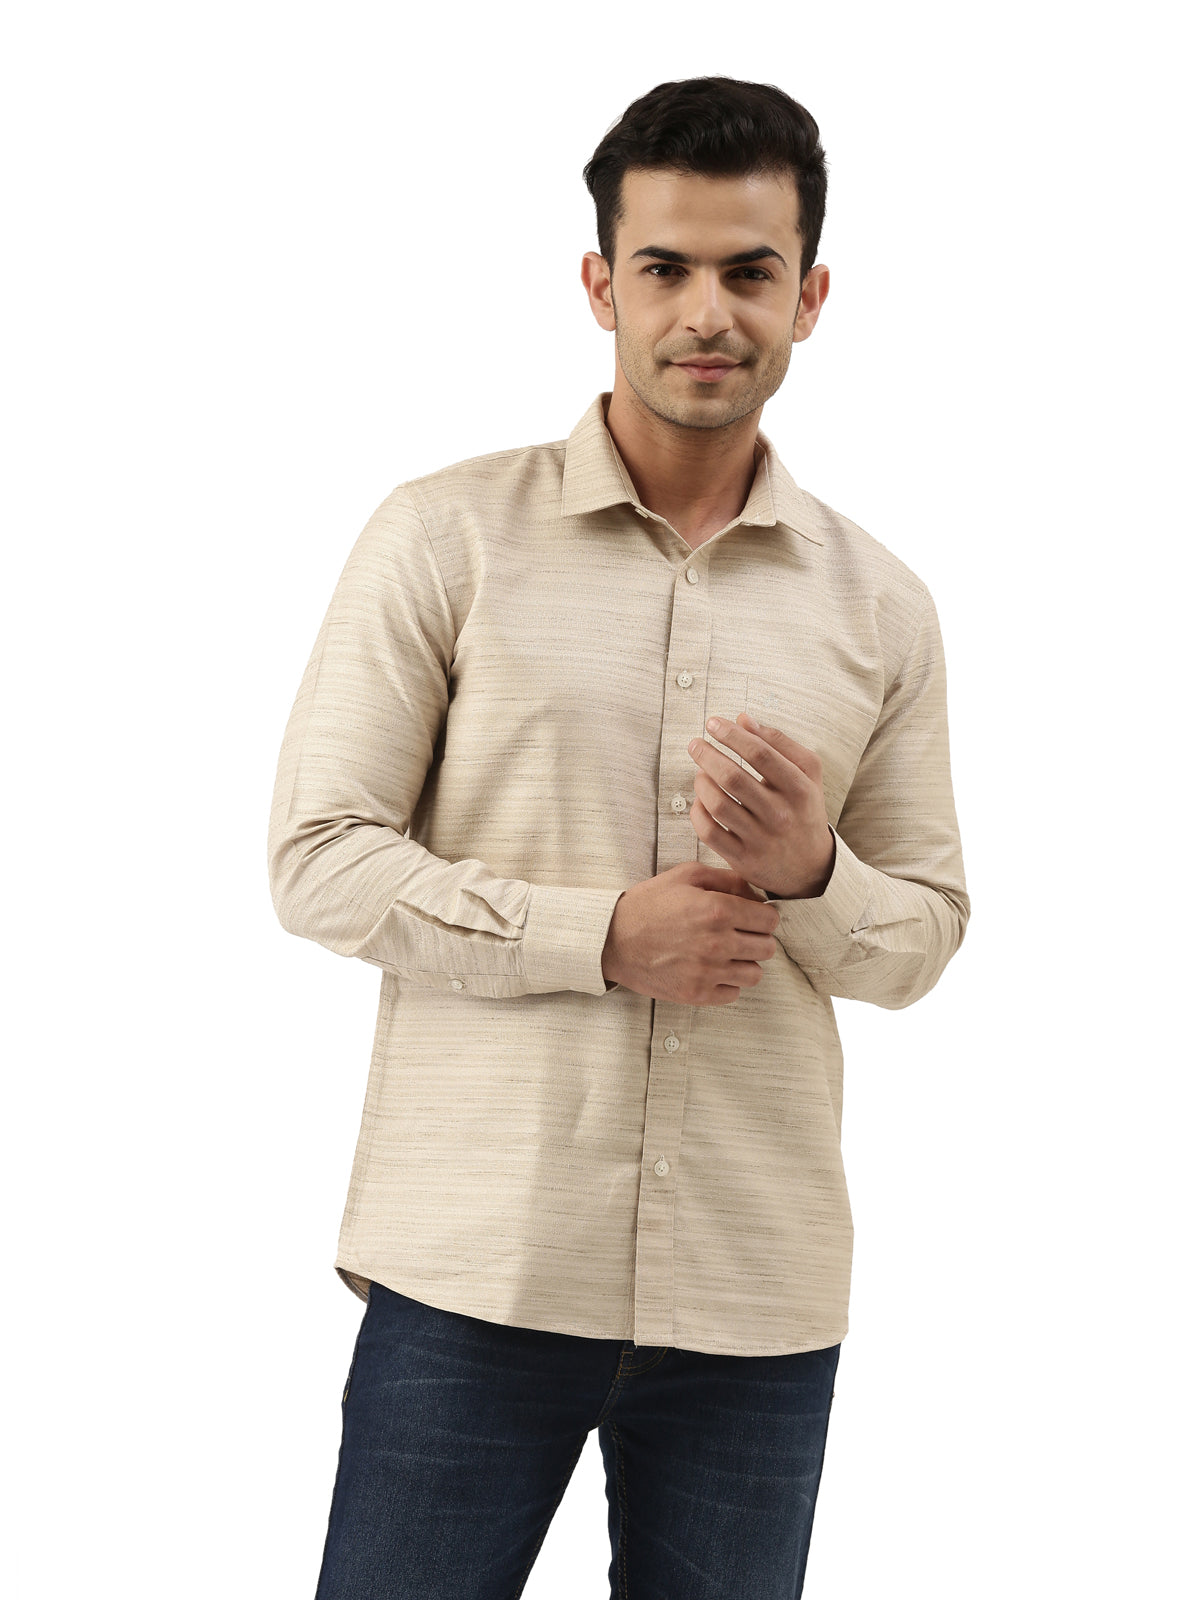 Buy Beige Cotton Slim Fit Solid Party Shirt - Tattva.Life